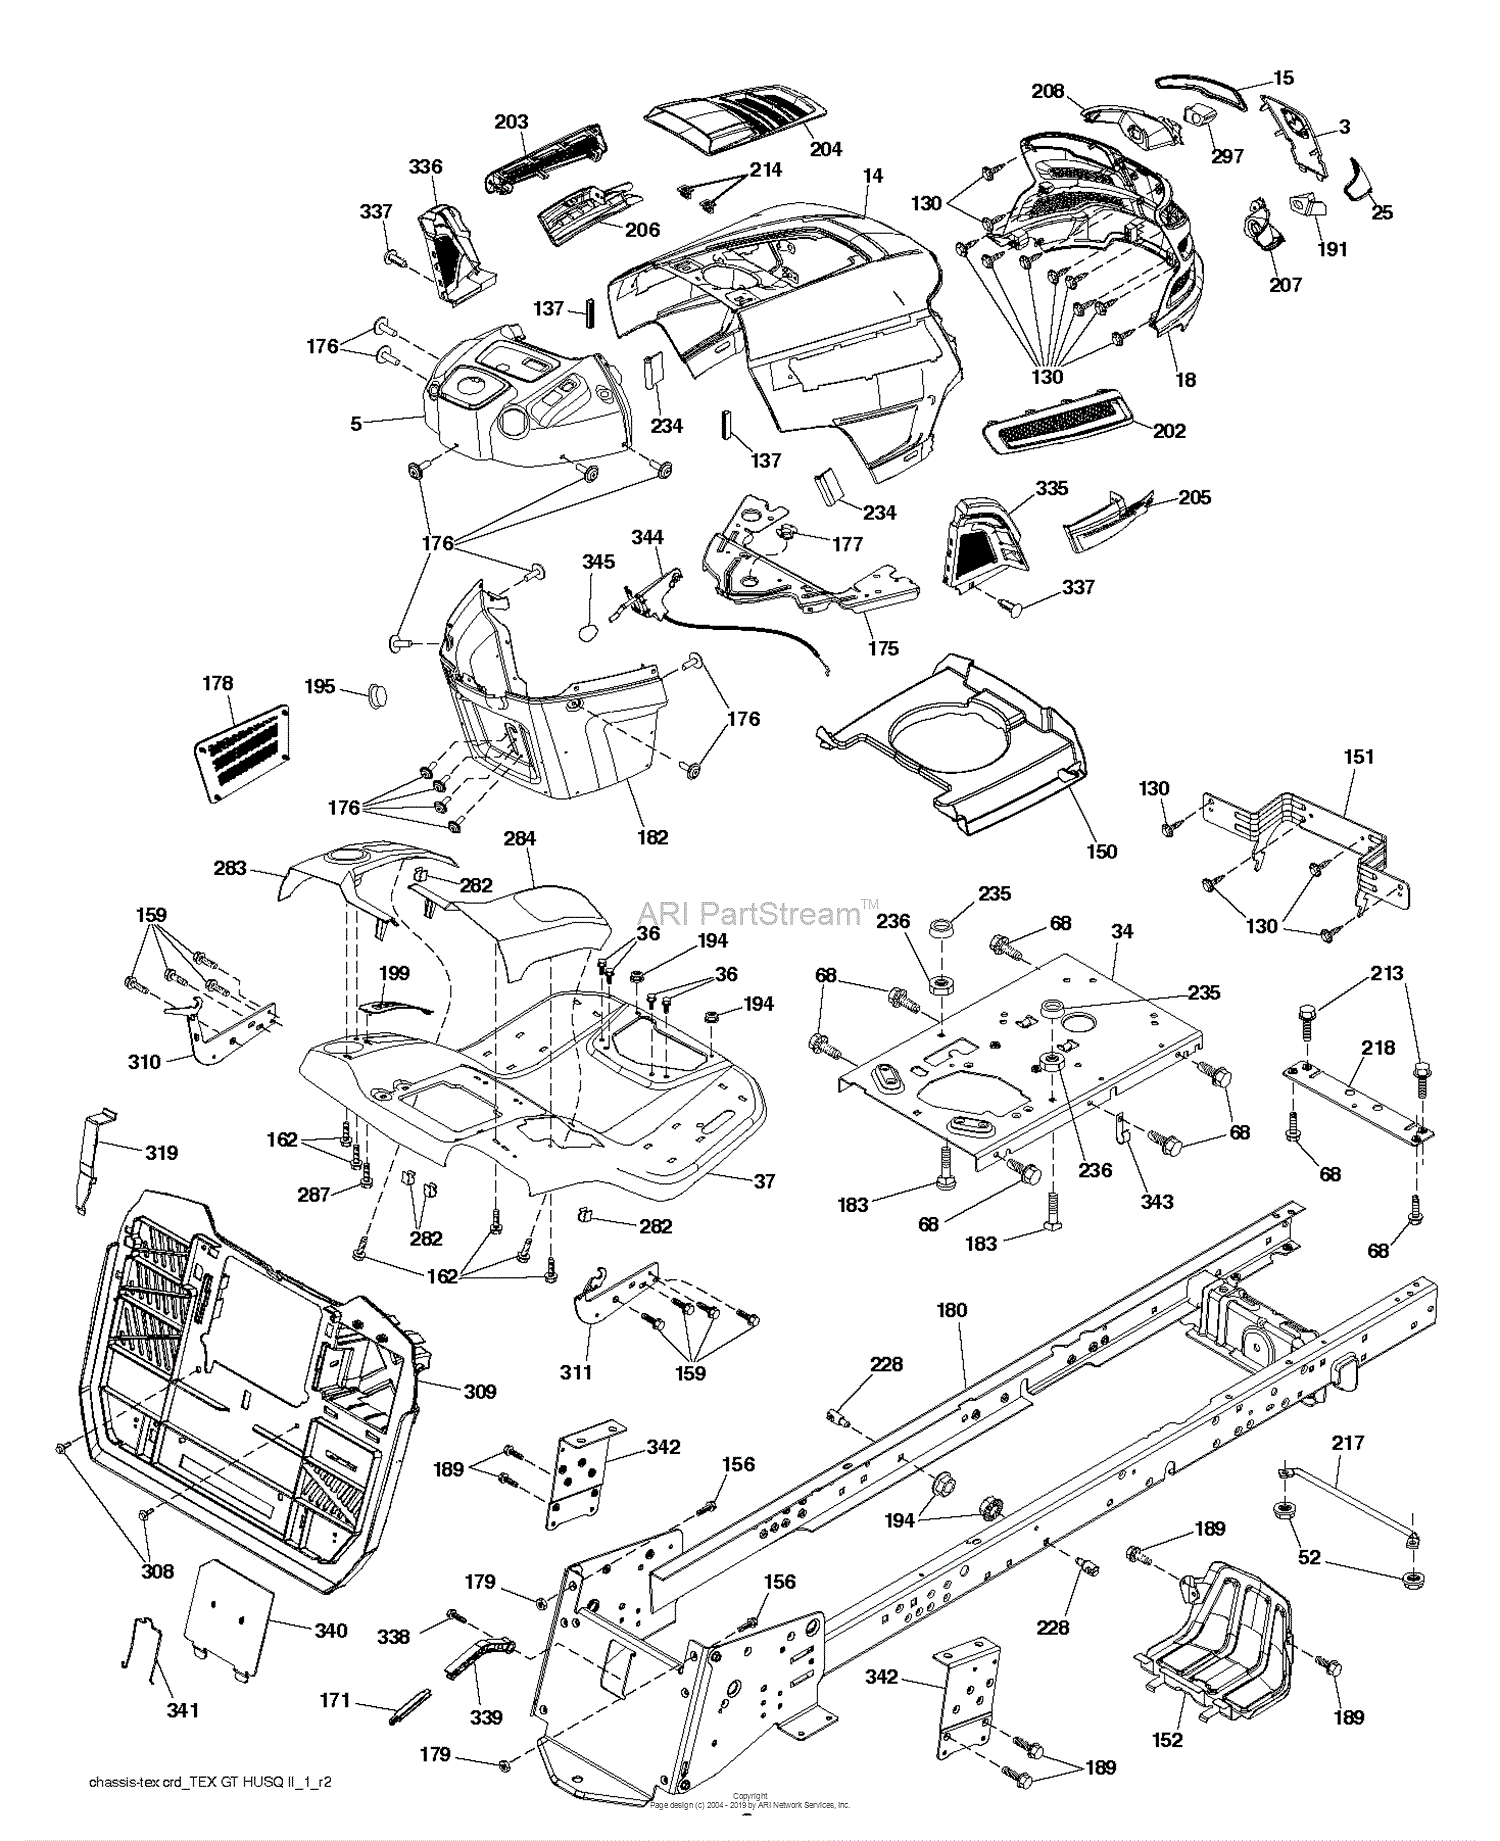 Husqvarna CTH163T - 96051000300 (2011-03) Parts Diagram for CHASSIS / FRAME